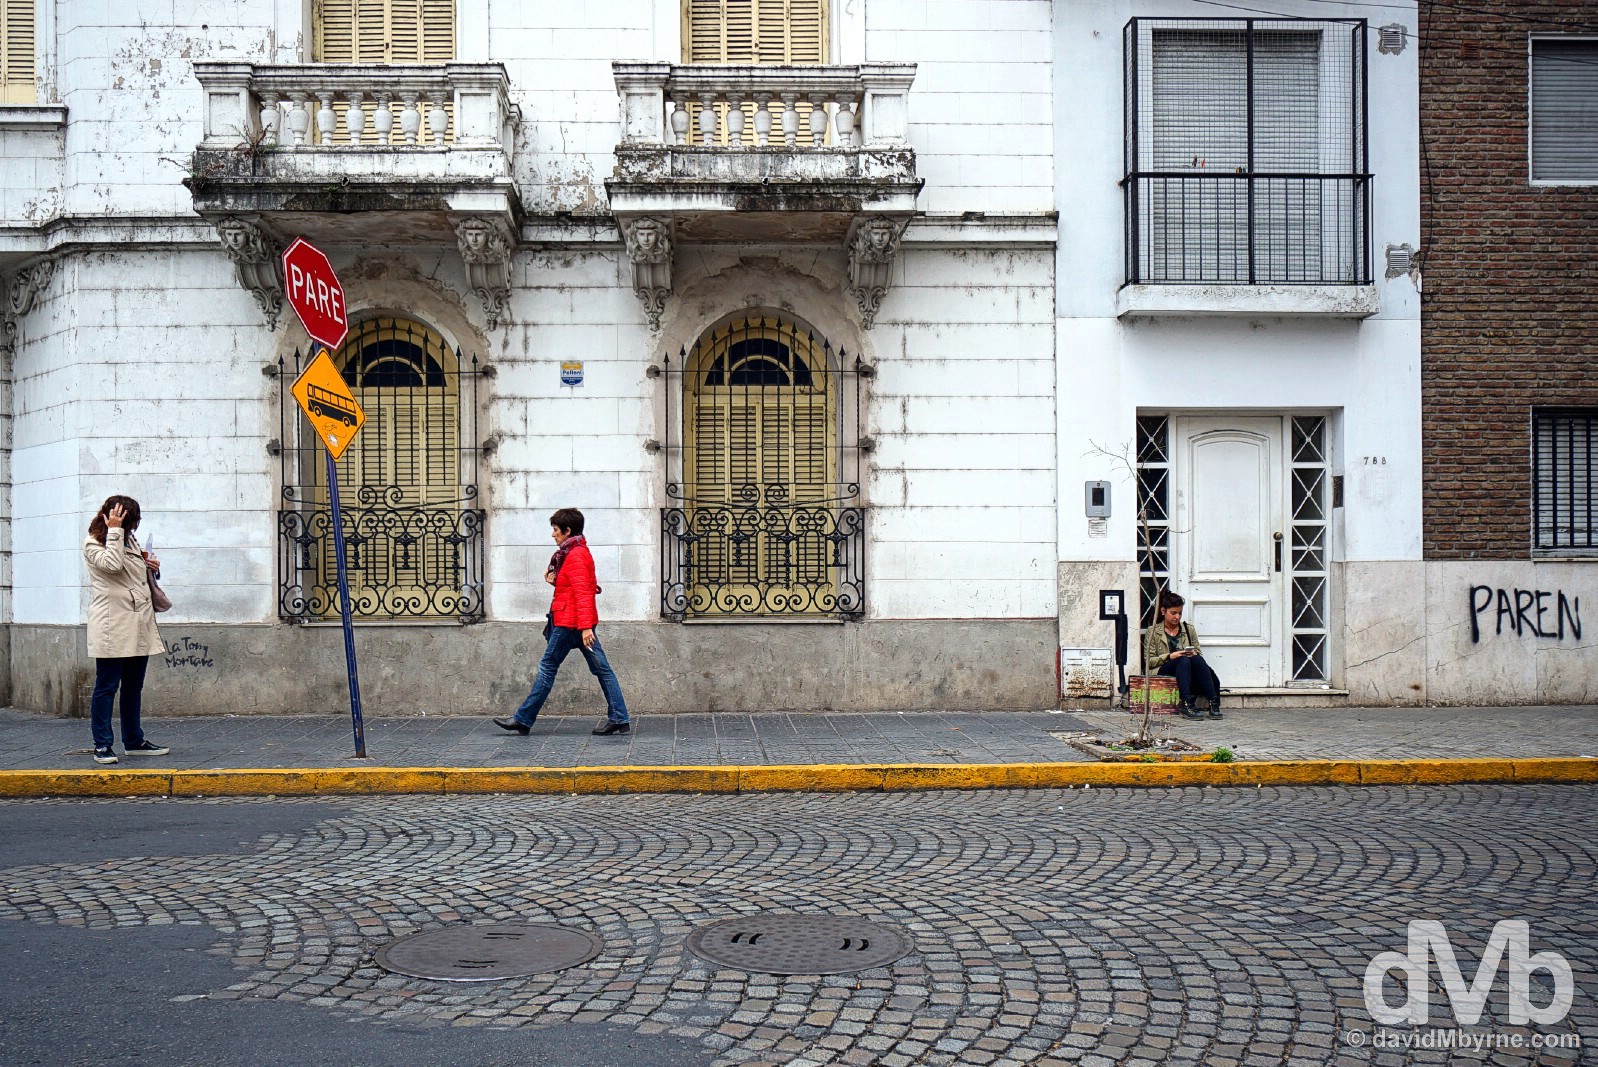 On the streets of Rosario, Argentina. September 22, 2015. 